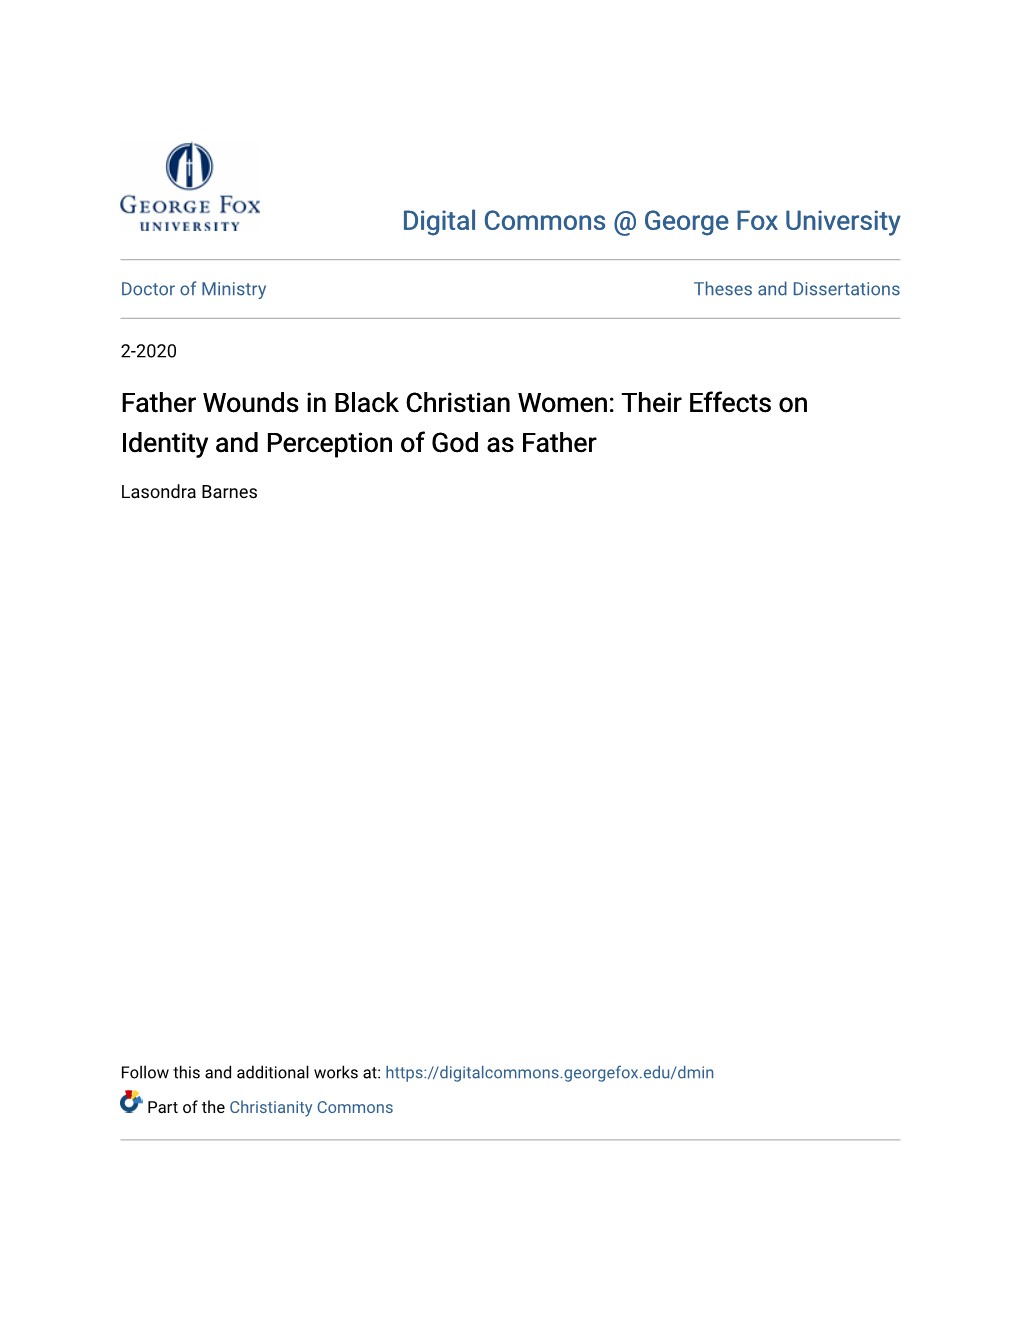 Father Wounds in Black Christian Women: Their Effects on Identity and Perception of God As Father